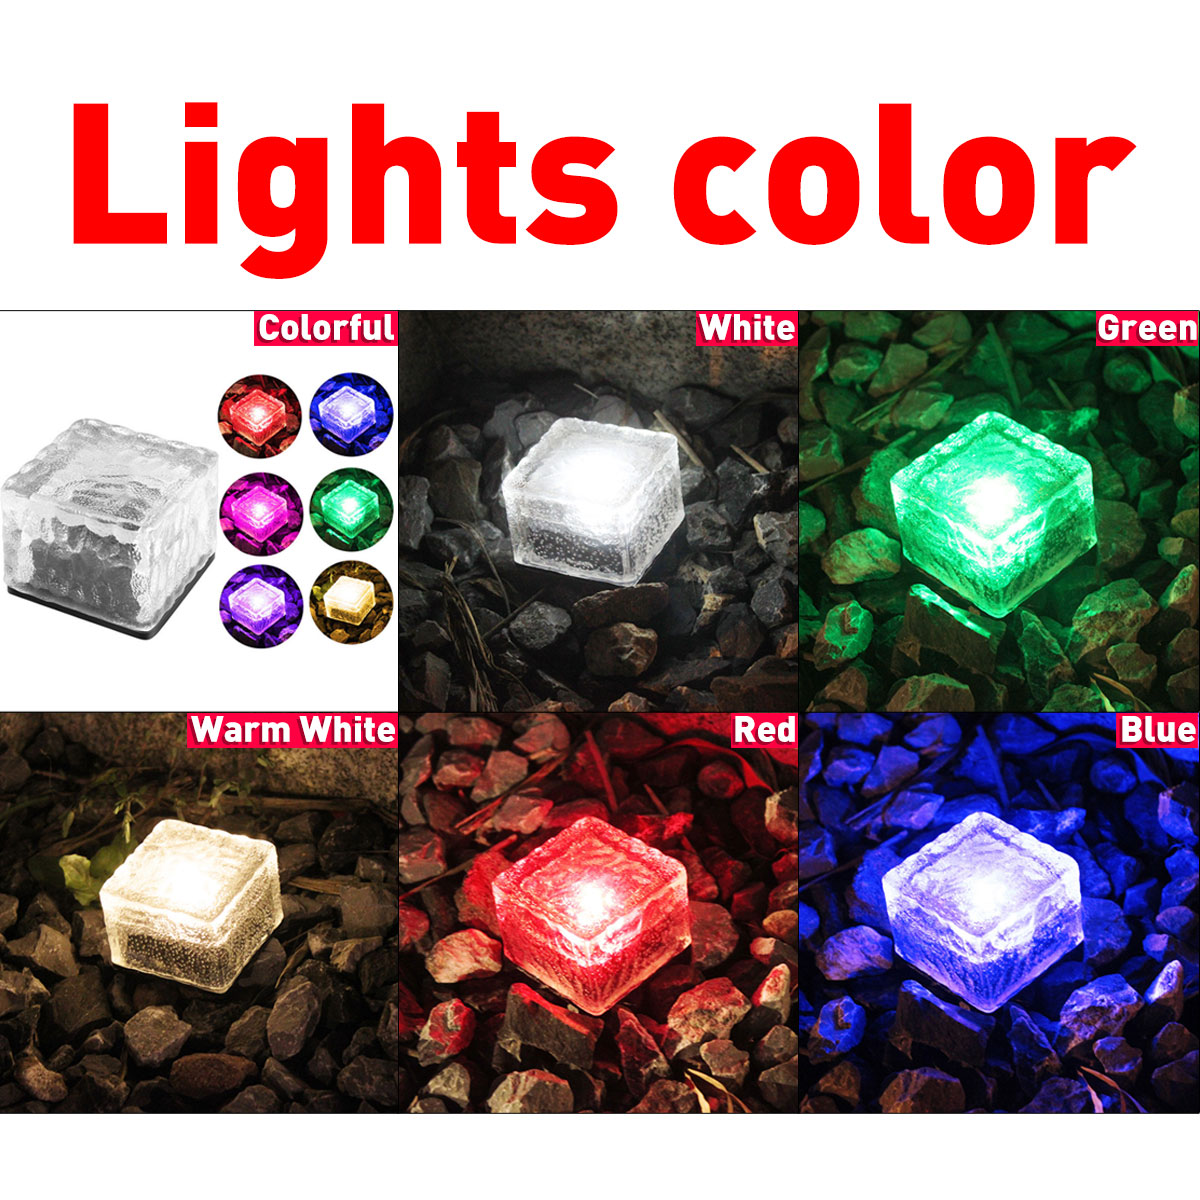 LED-Solar-Power-Buried-Light-Waterproof-Ice-Cube-Ground-Lawn-Lamp-Outdoor-Path-Garden-Deck-Lighting-1730821-2